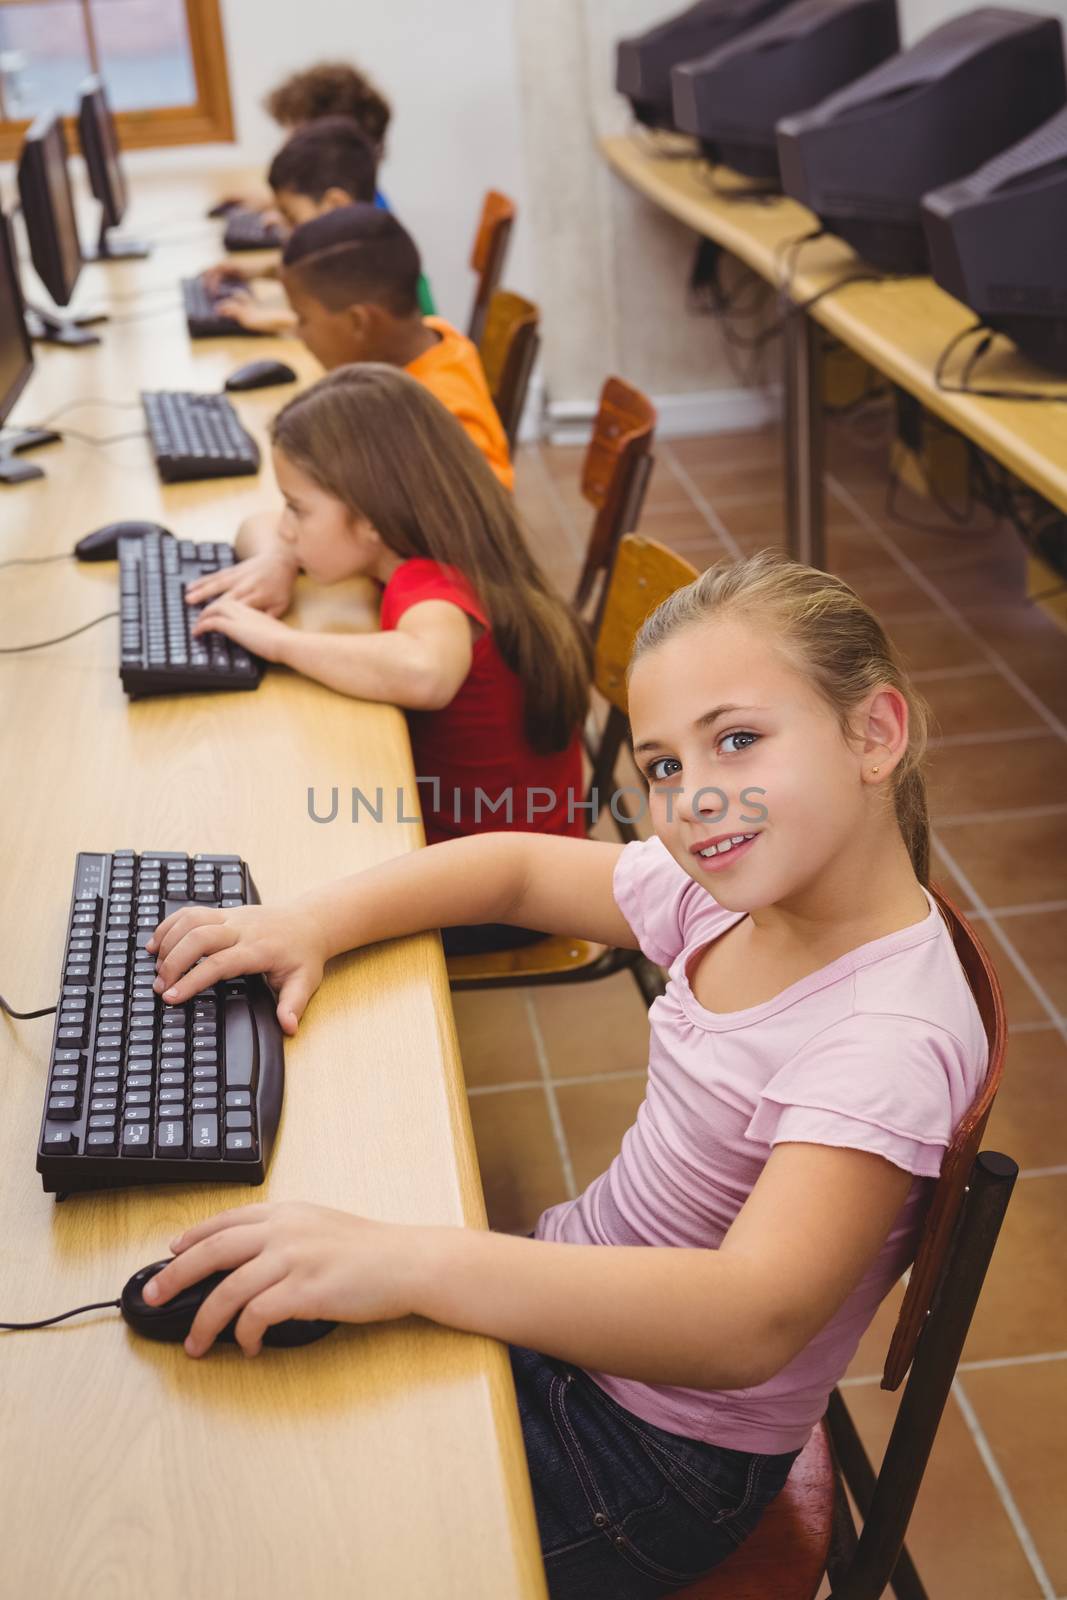 Smiling student using a computer at the elementary school